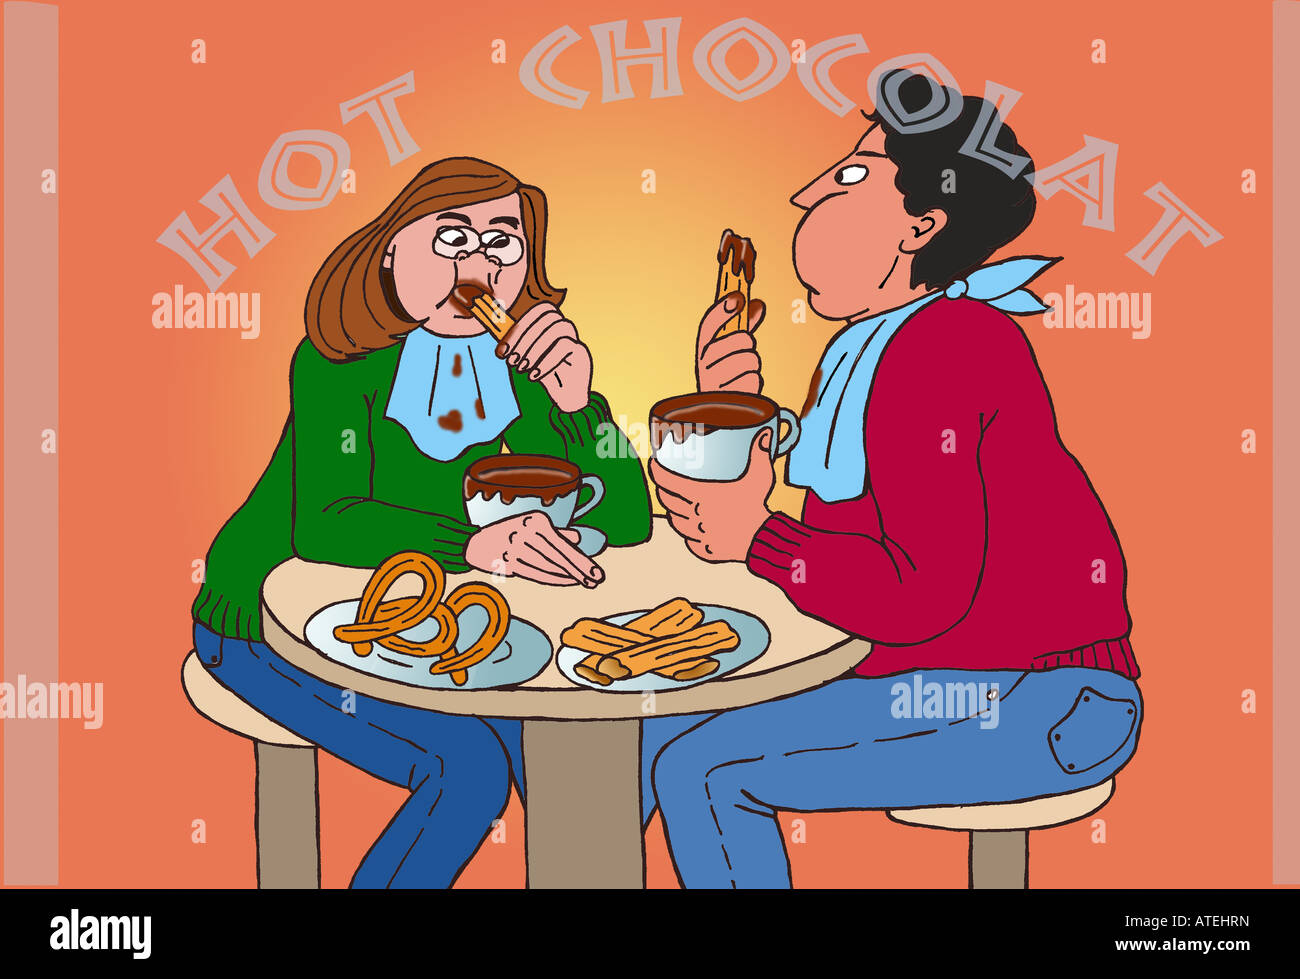 Illustration: man and woman eating chocolate with churros Stock Photo